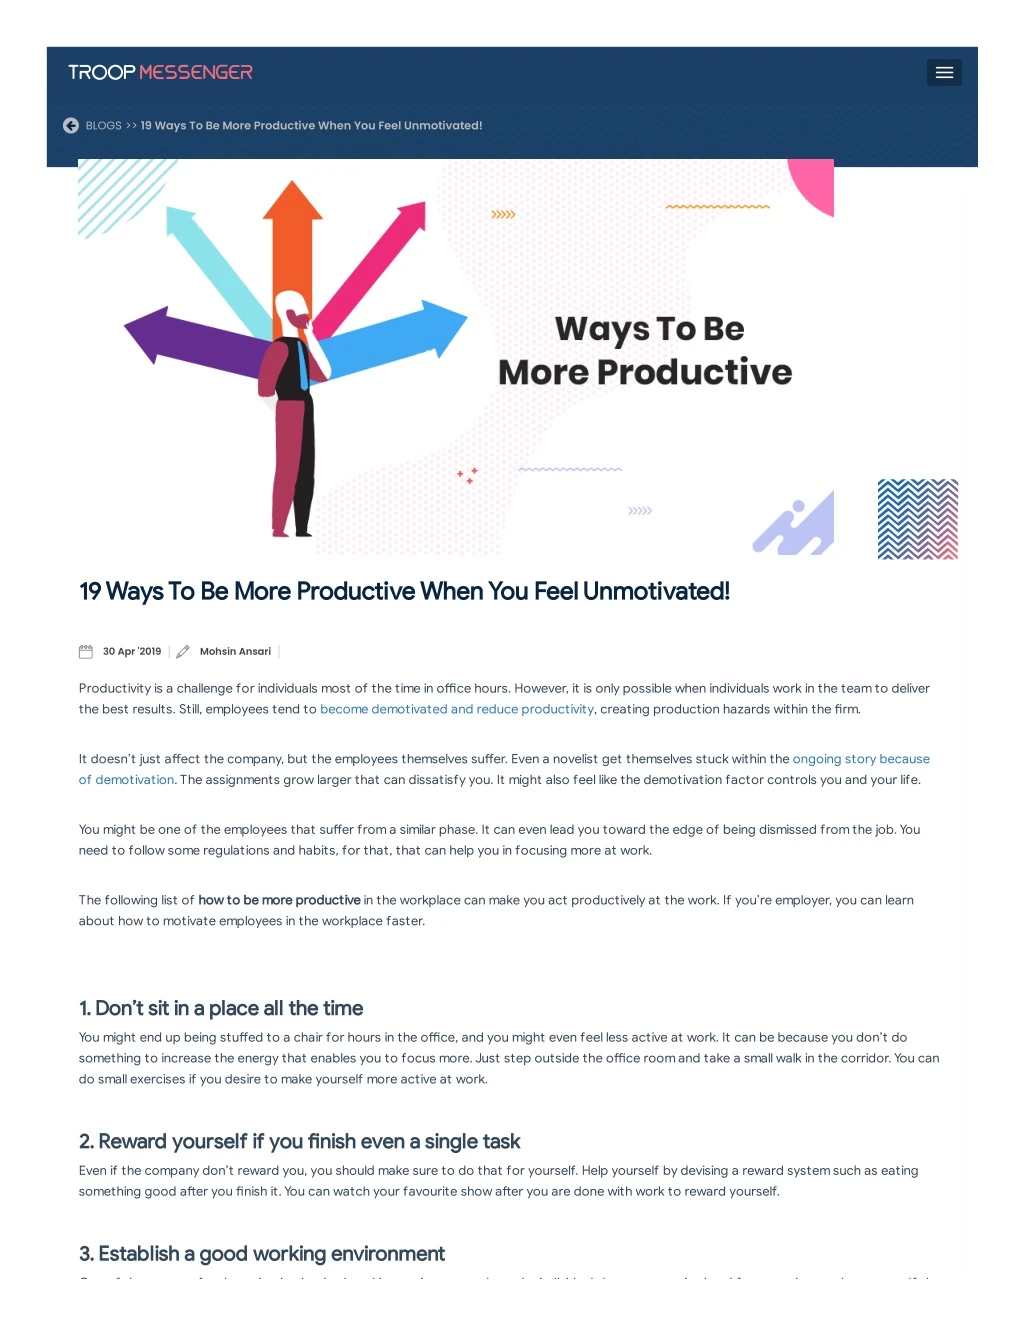 blogs 19 ways to be more productive when you feel